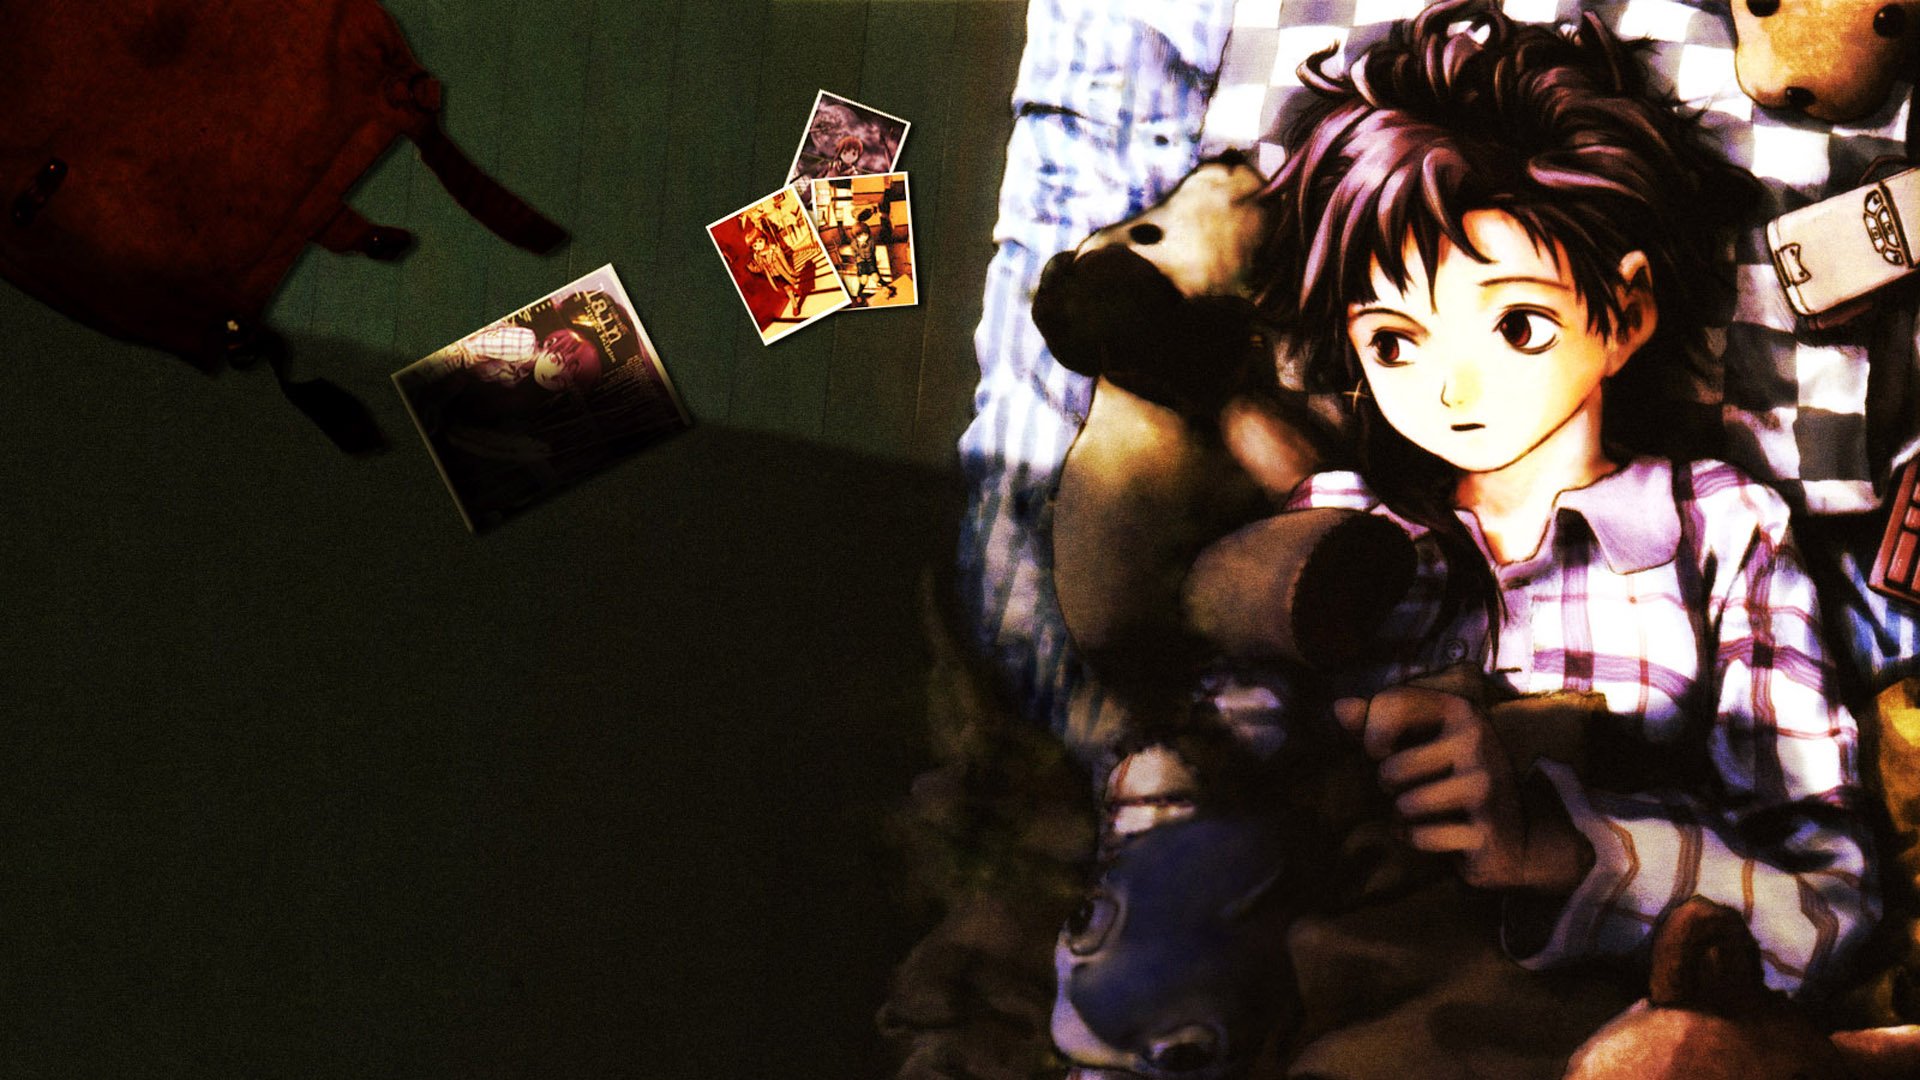 serial experiments lain wallpaper,games,anime,adventure game,pc game,room